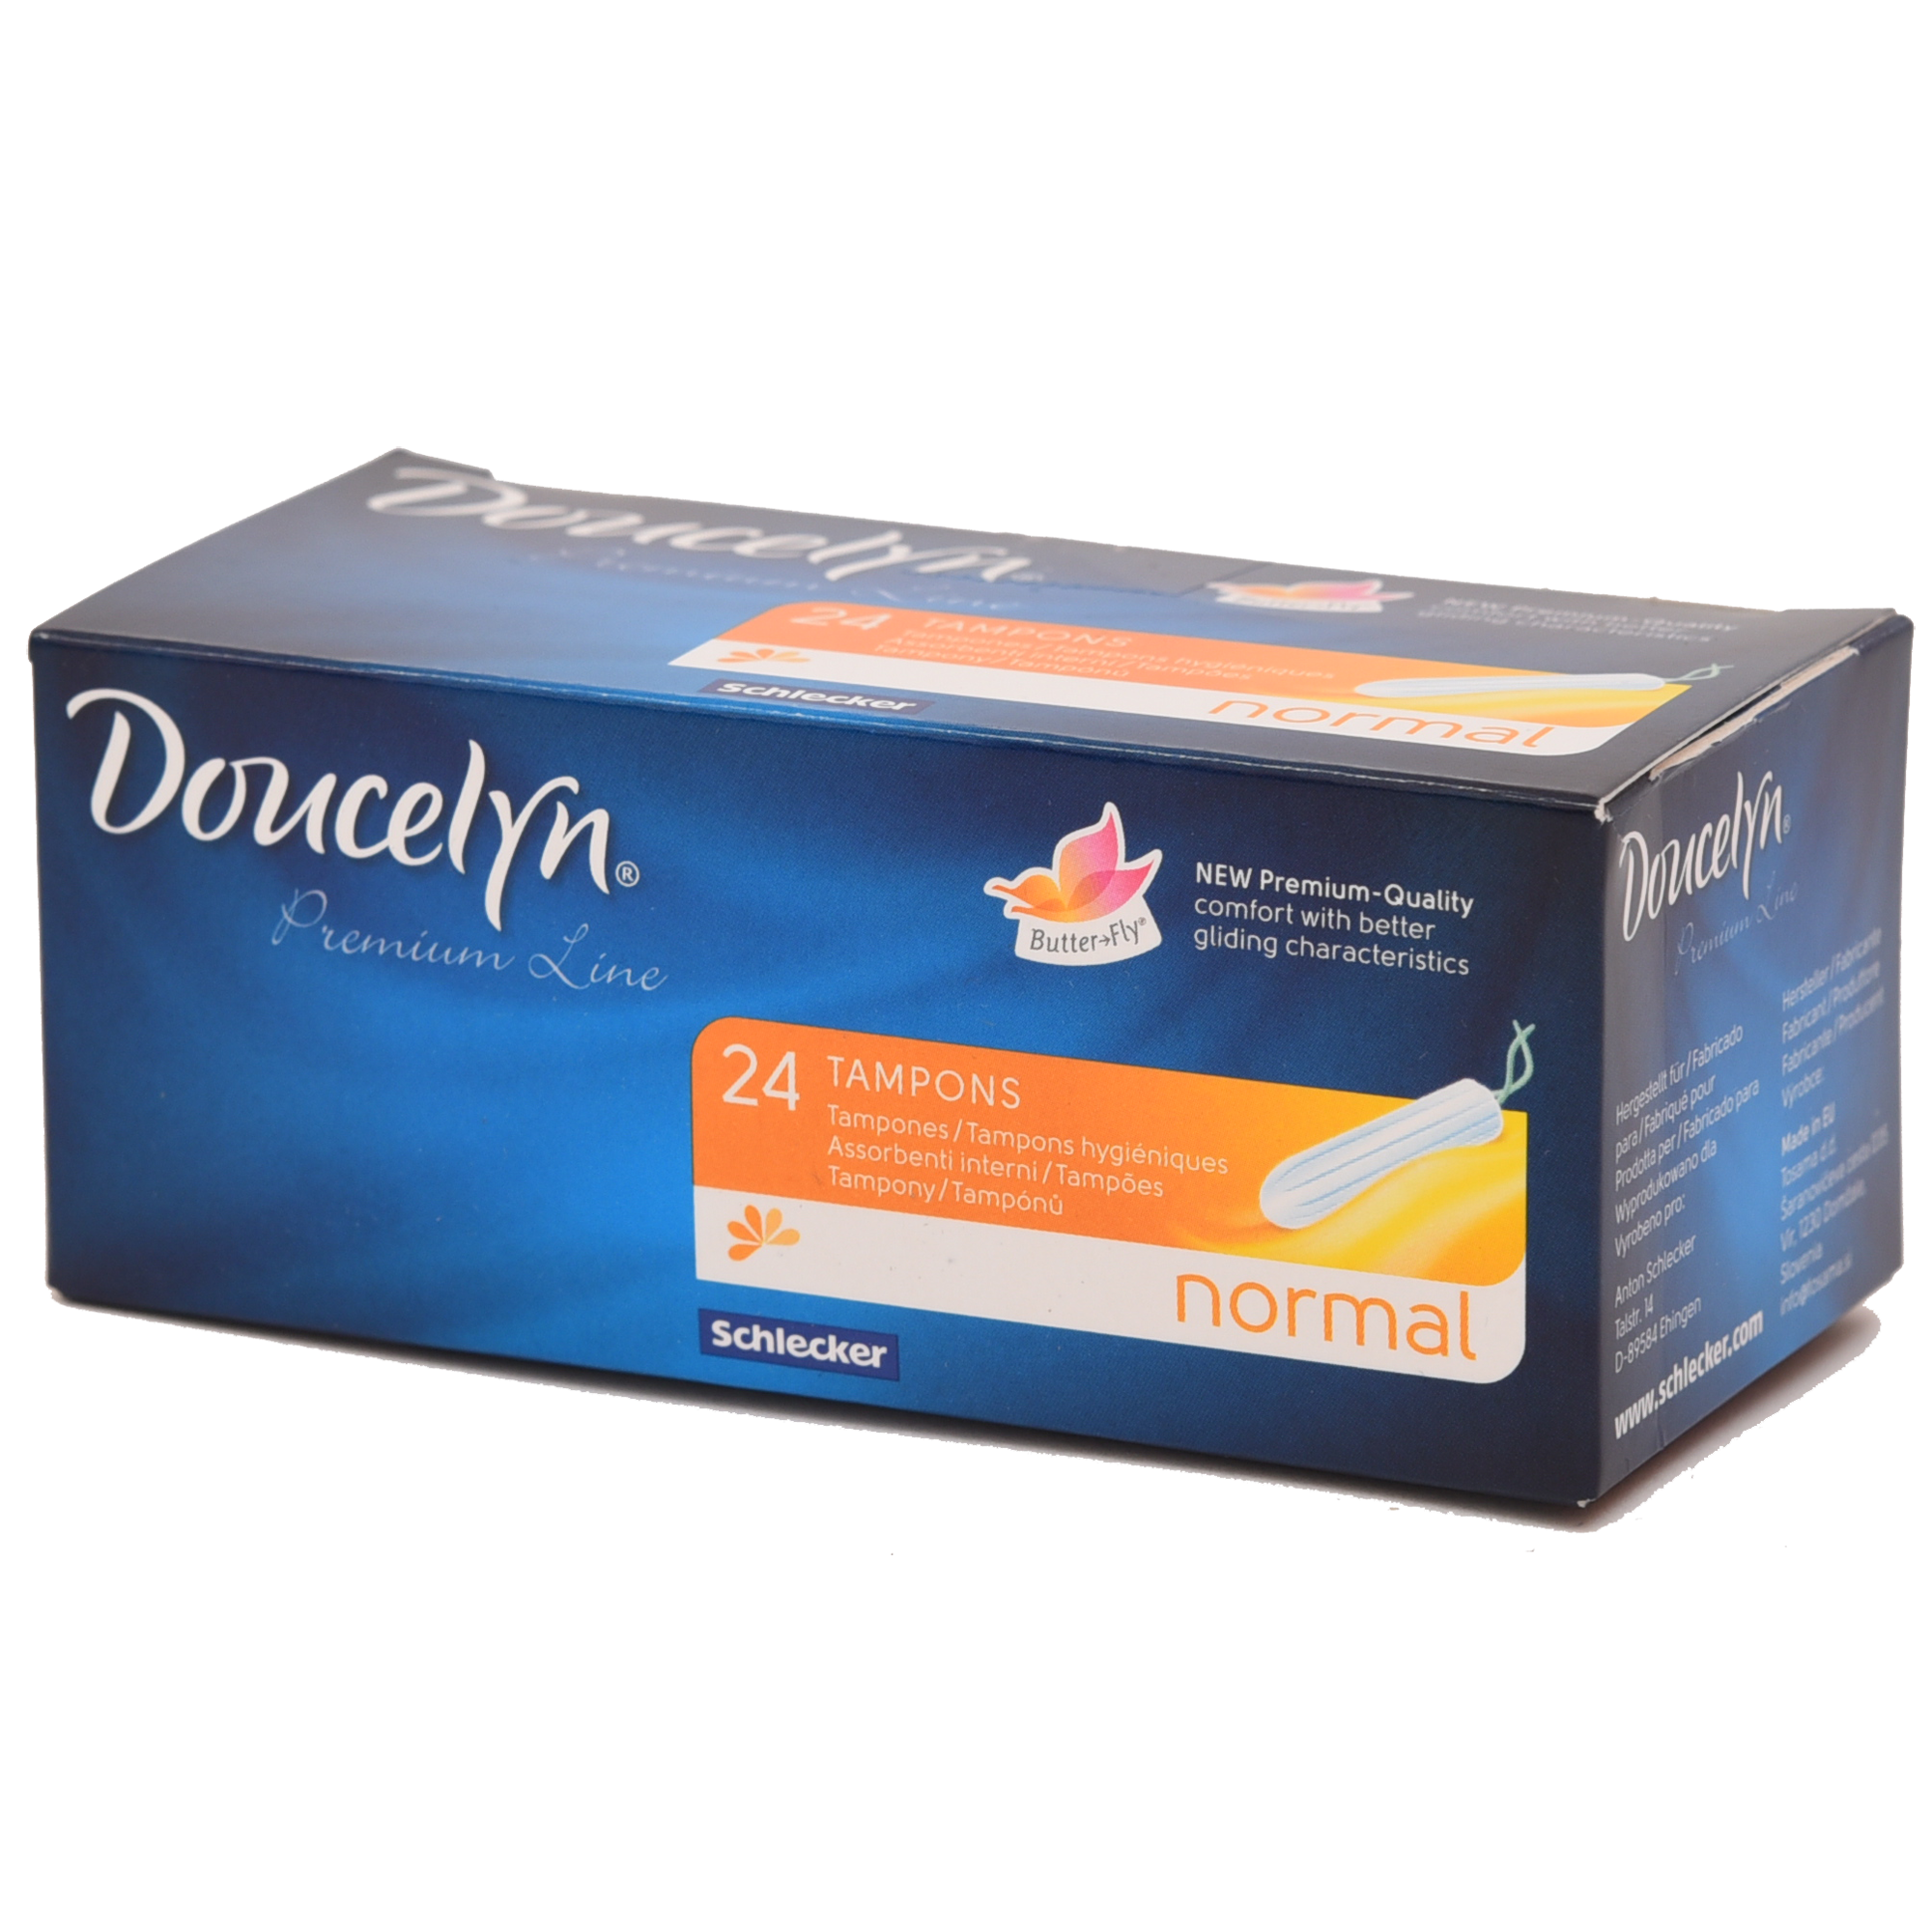 doucelyn normál tampon